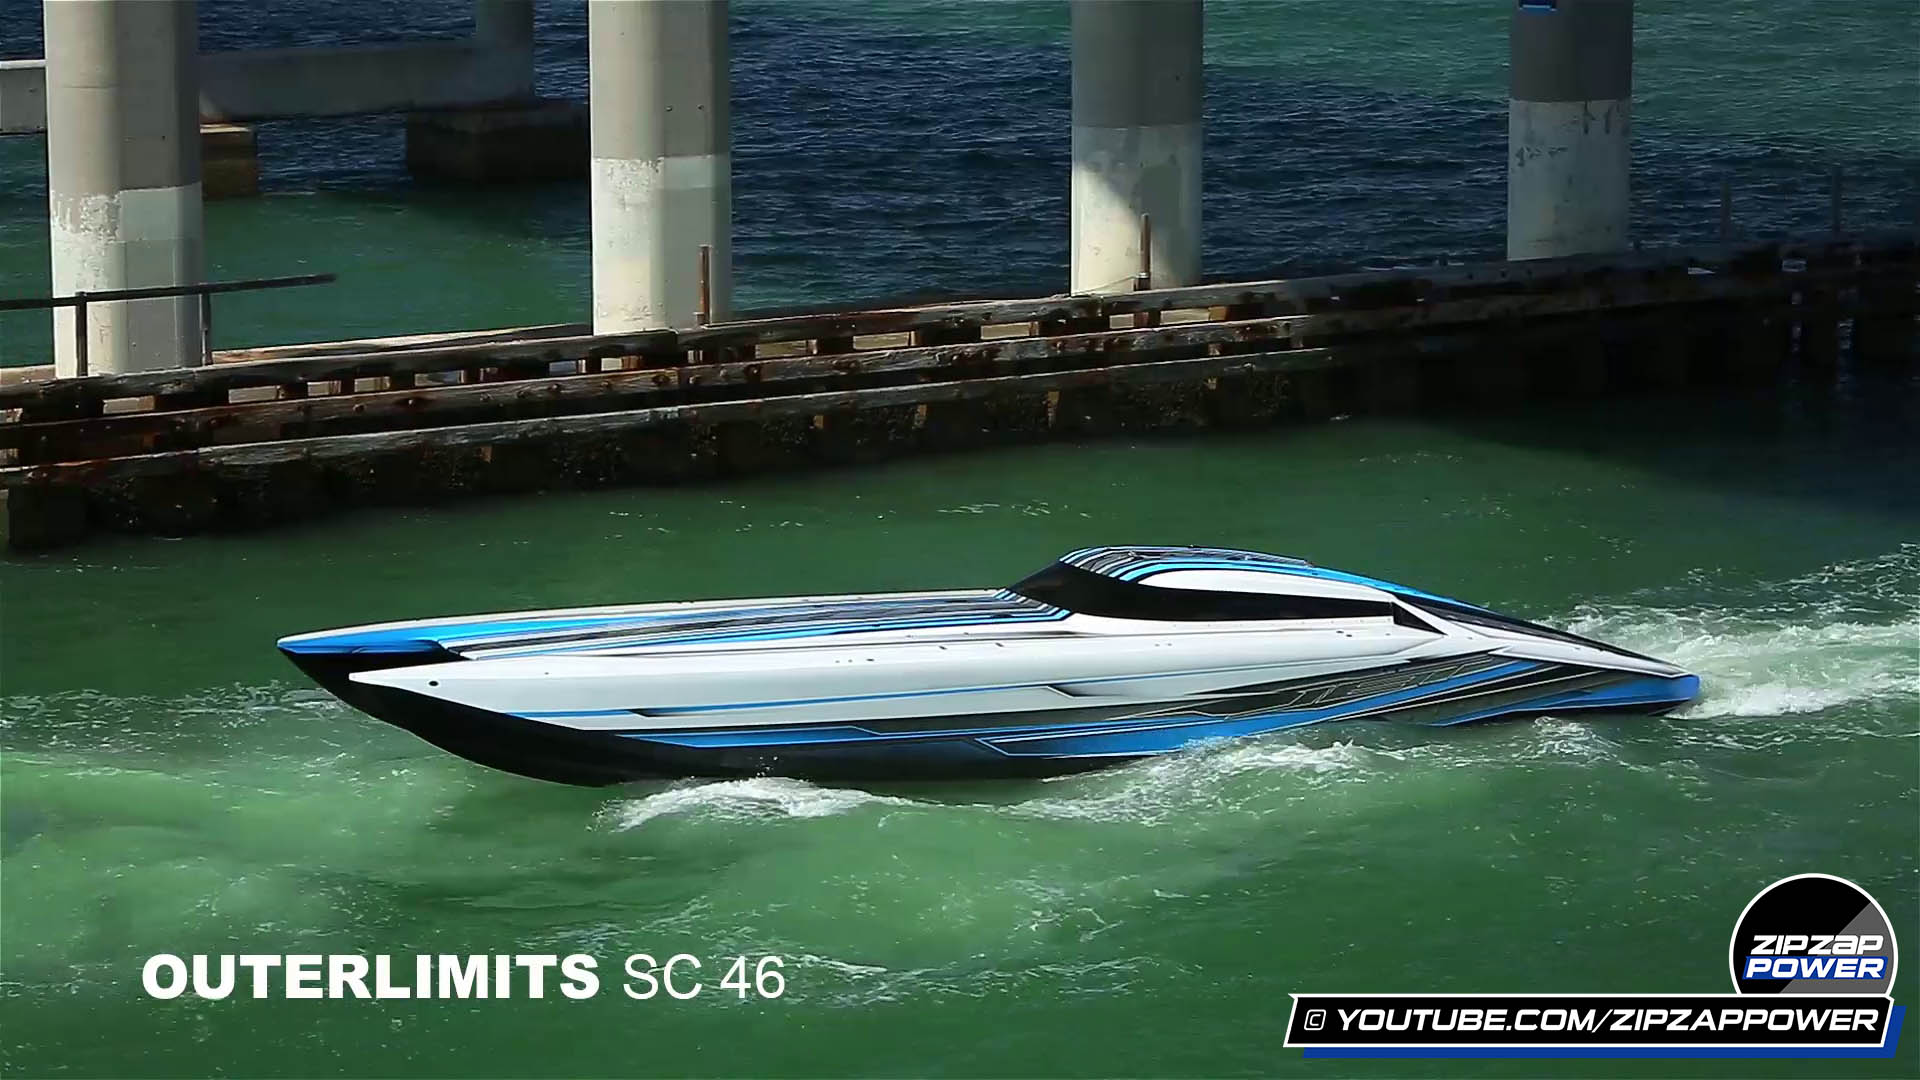 Outerlimits powerboat JET SC 46